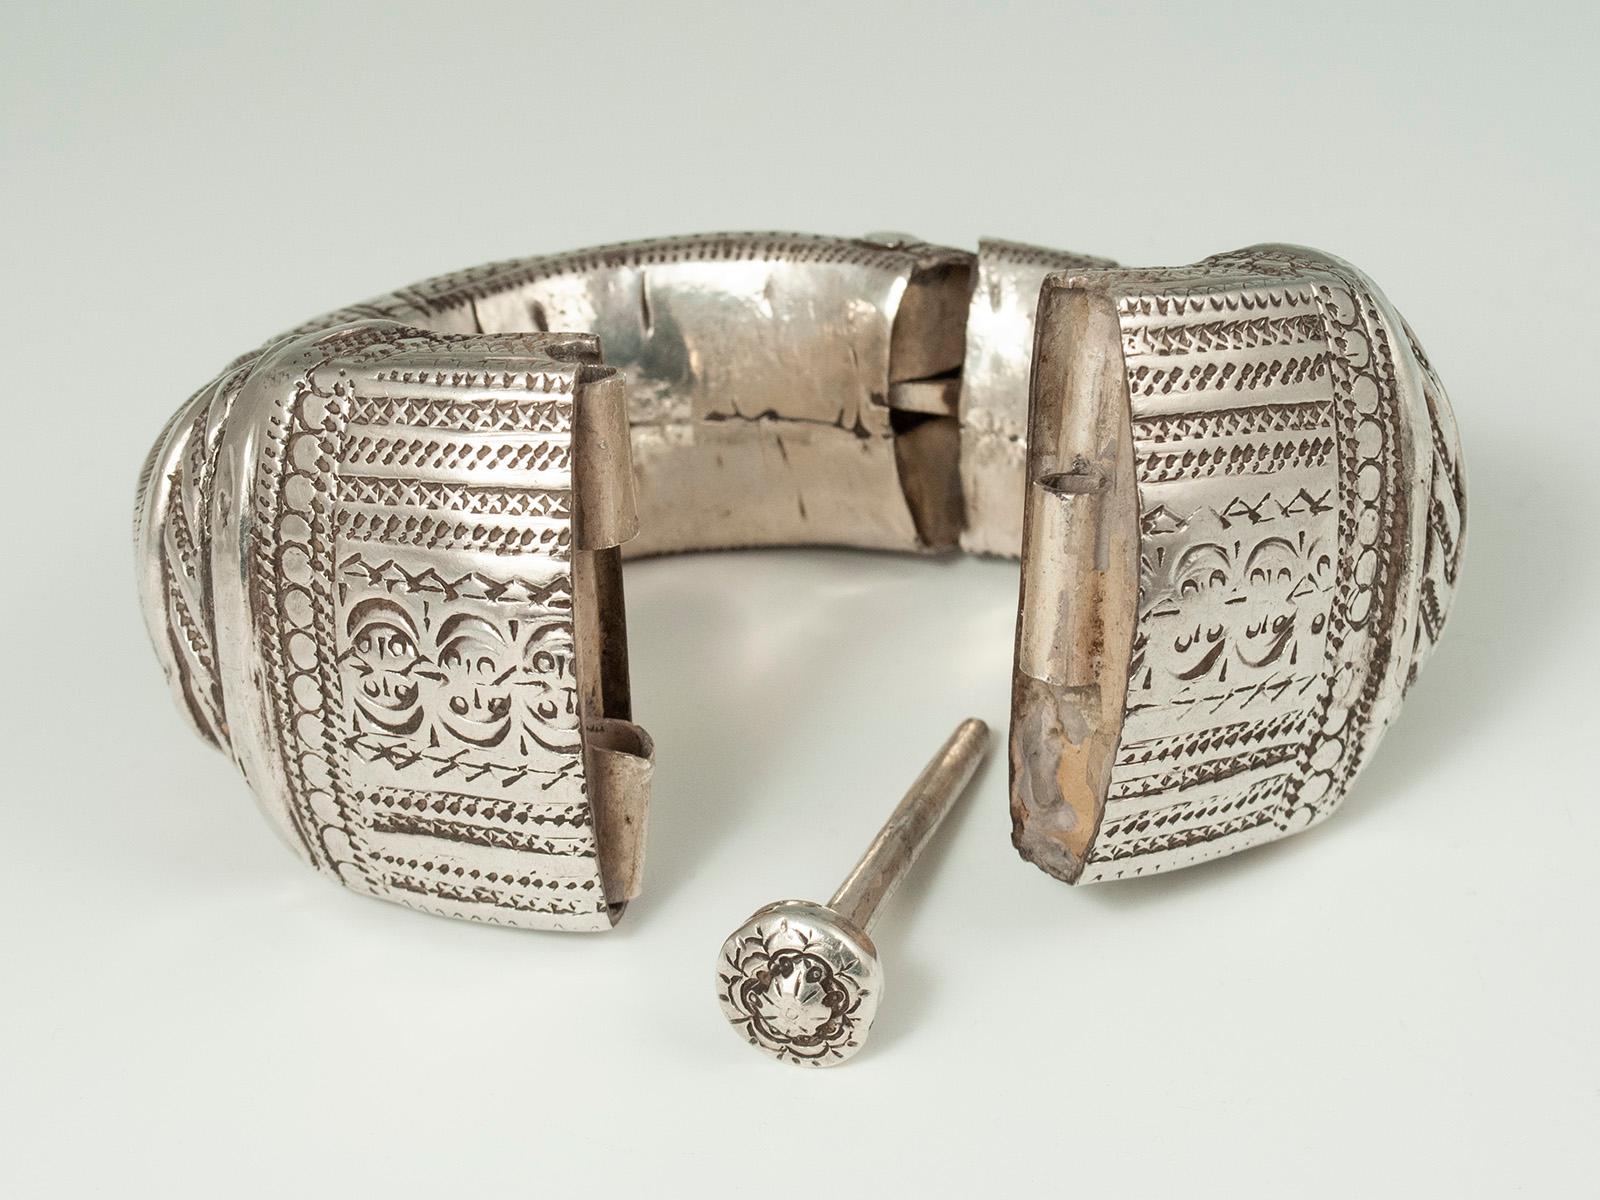 Tribal Late 19th to Early 20th Century Silver Anklets, Oman